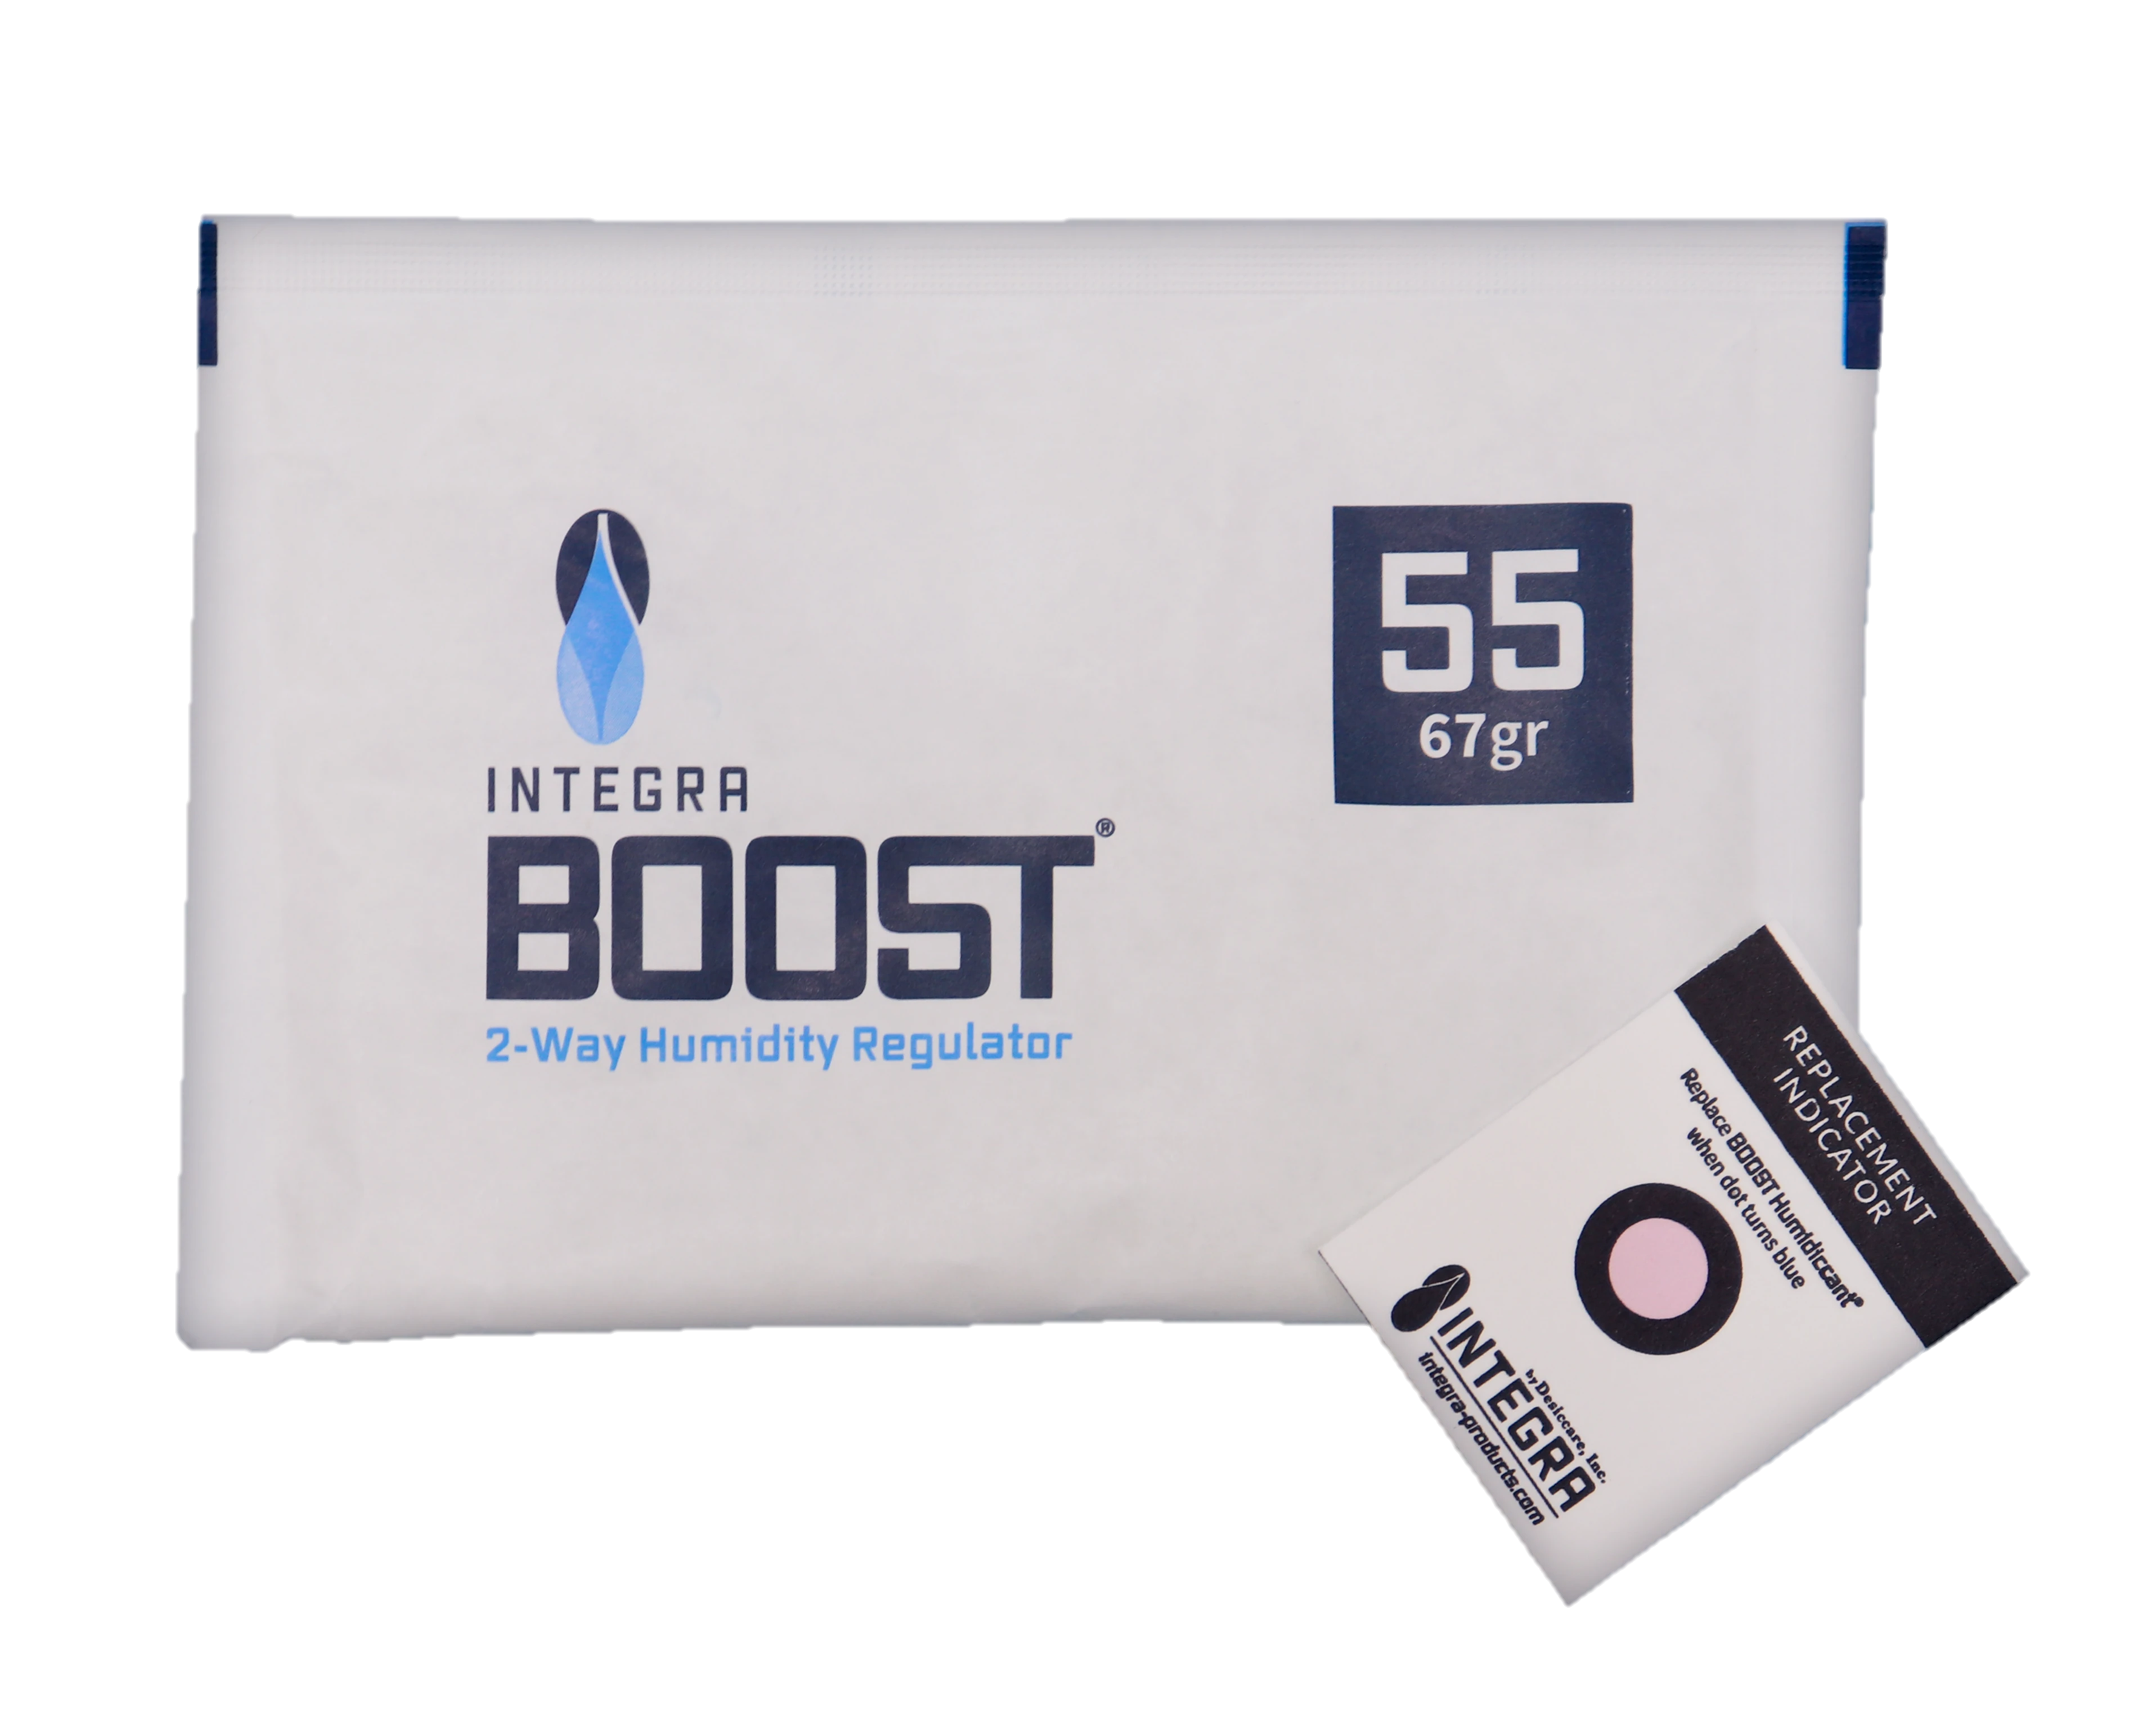 Desiccare Integra BOOST® 67 gram 55% RH retail box individually wrapped 2-way humidity control packs with HIC